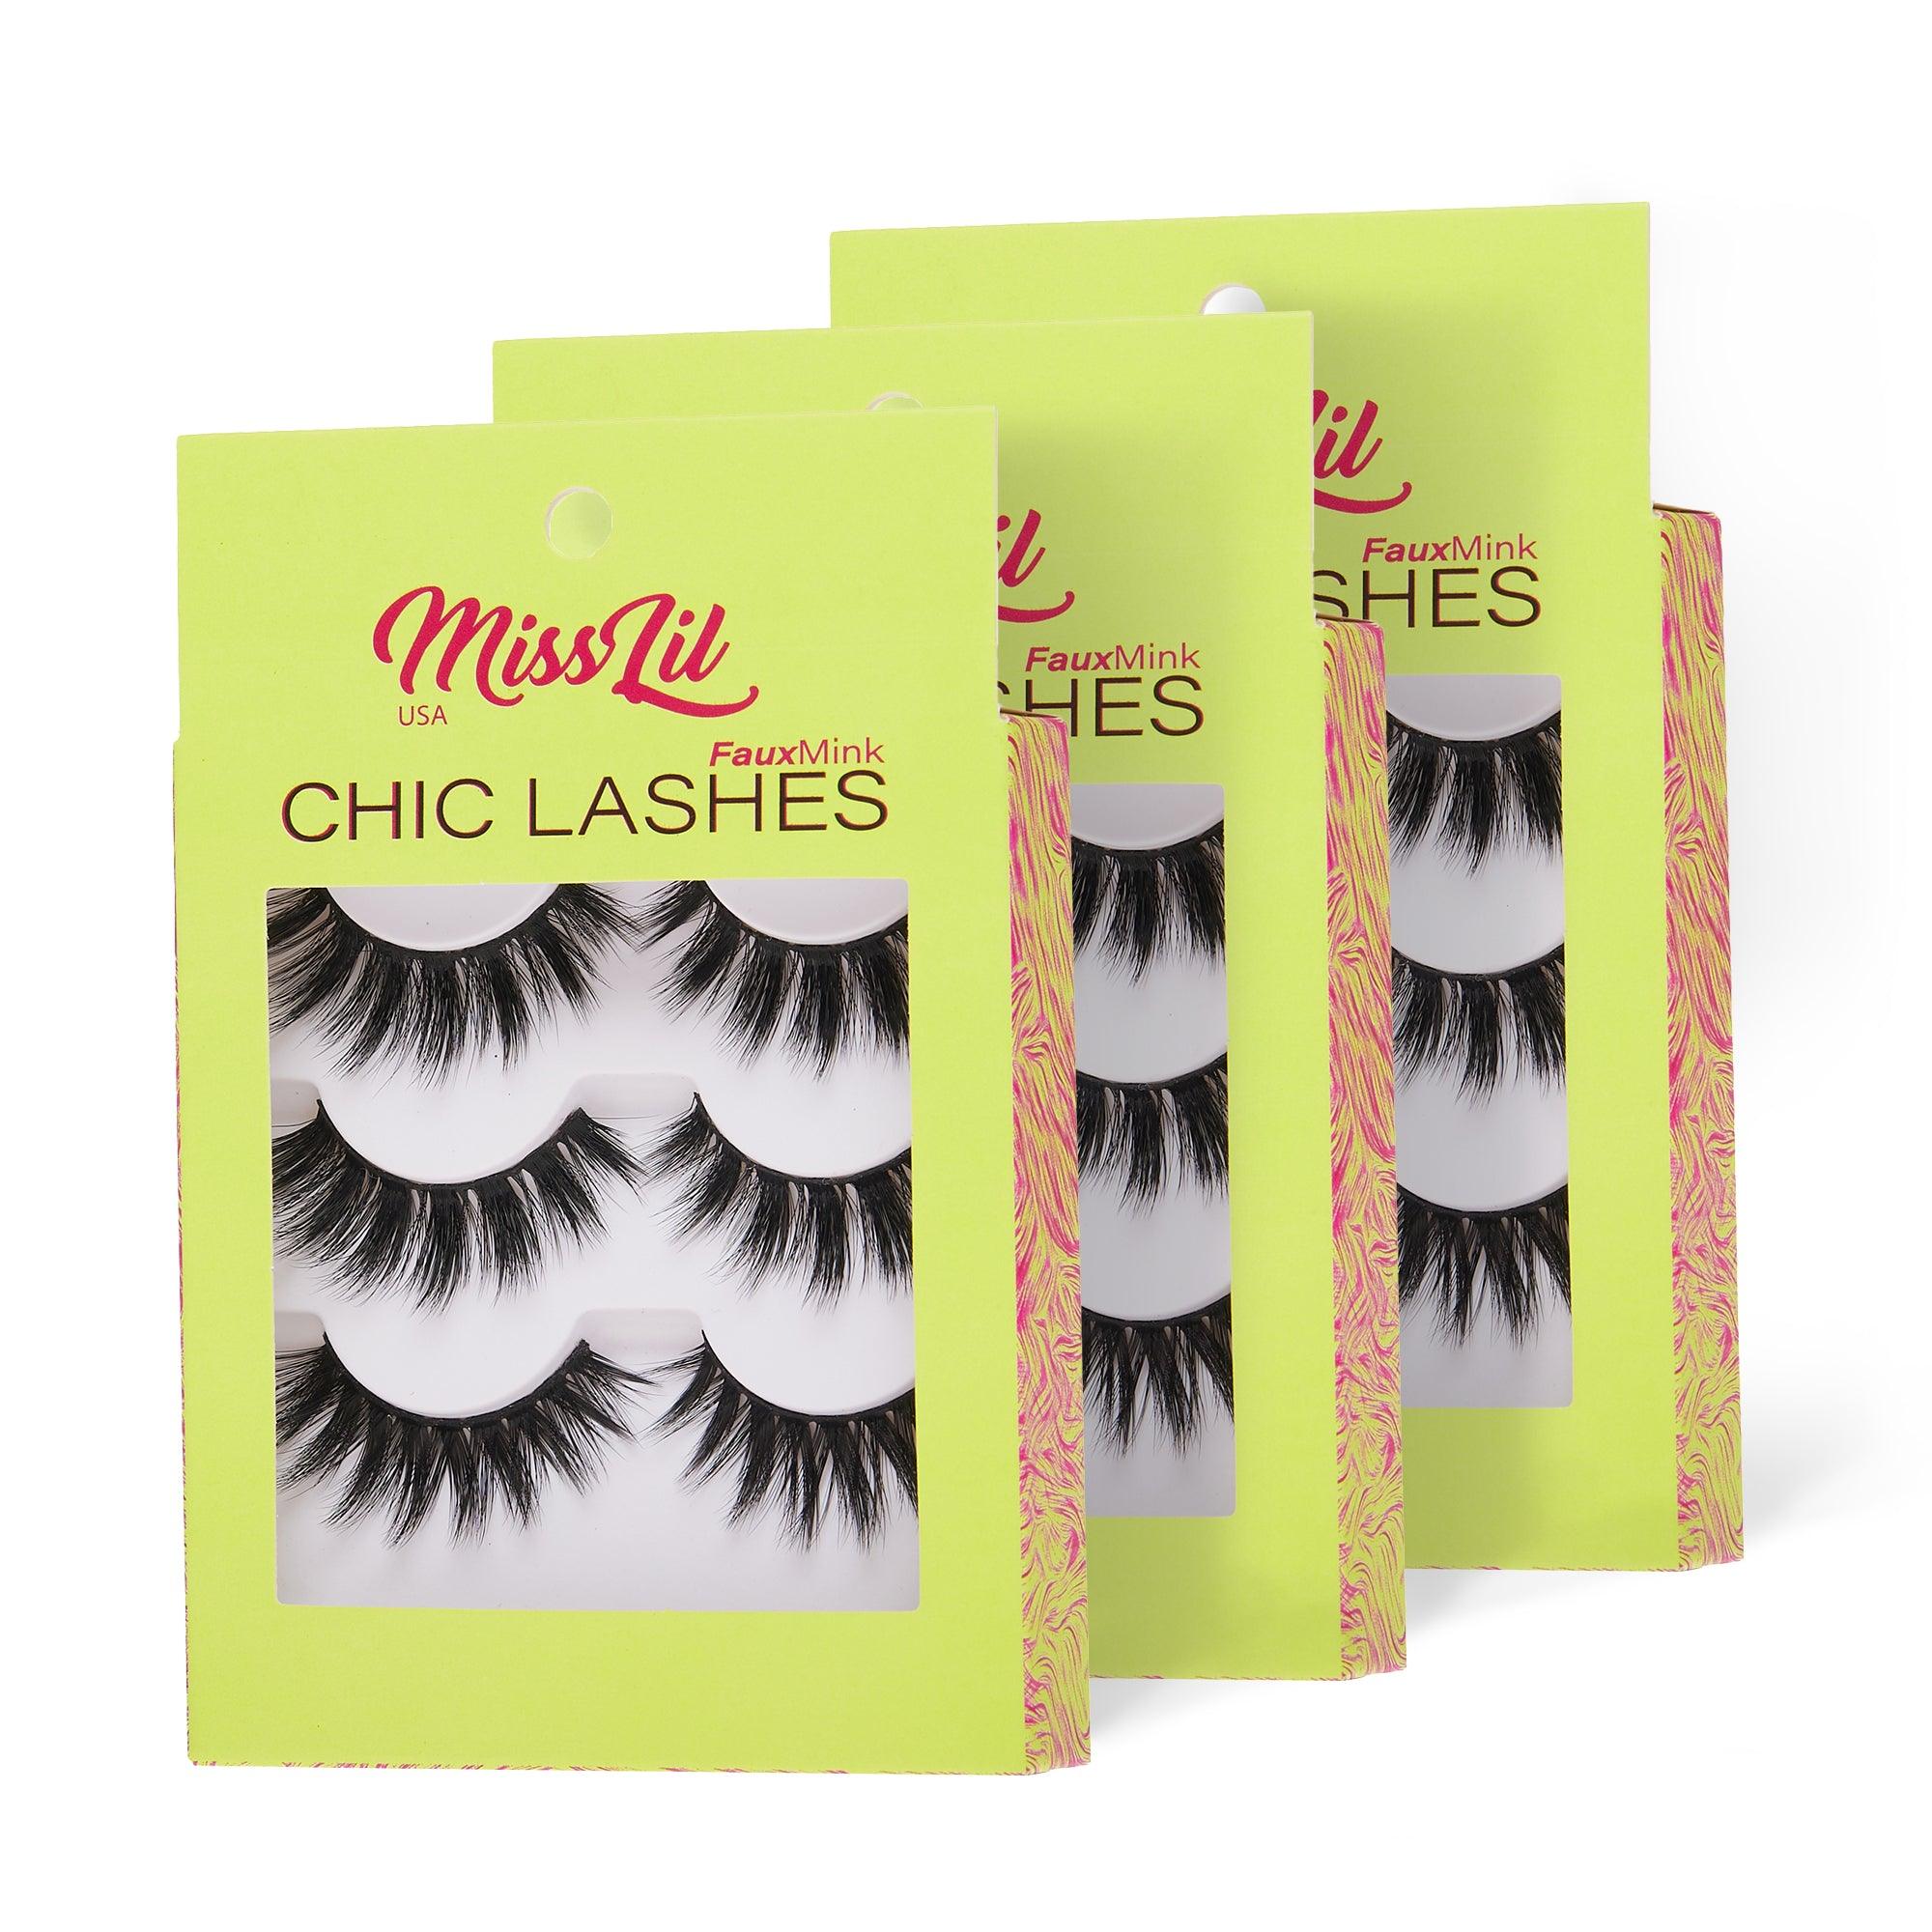 3-Pair Faux Mink Eyelashes - Chic Lashes Collection #14 - Pack of 3 - Miss Lil USA